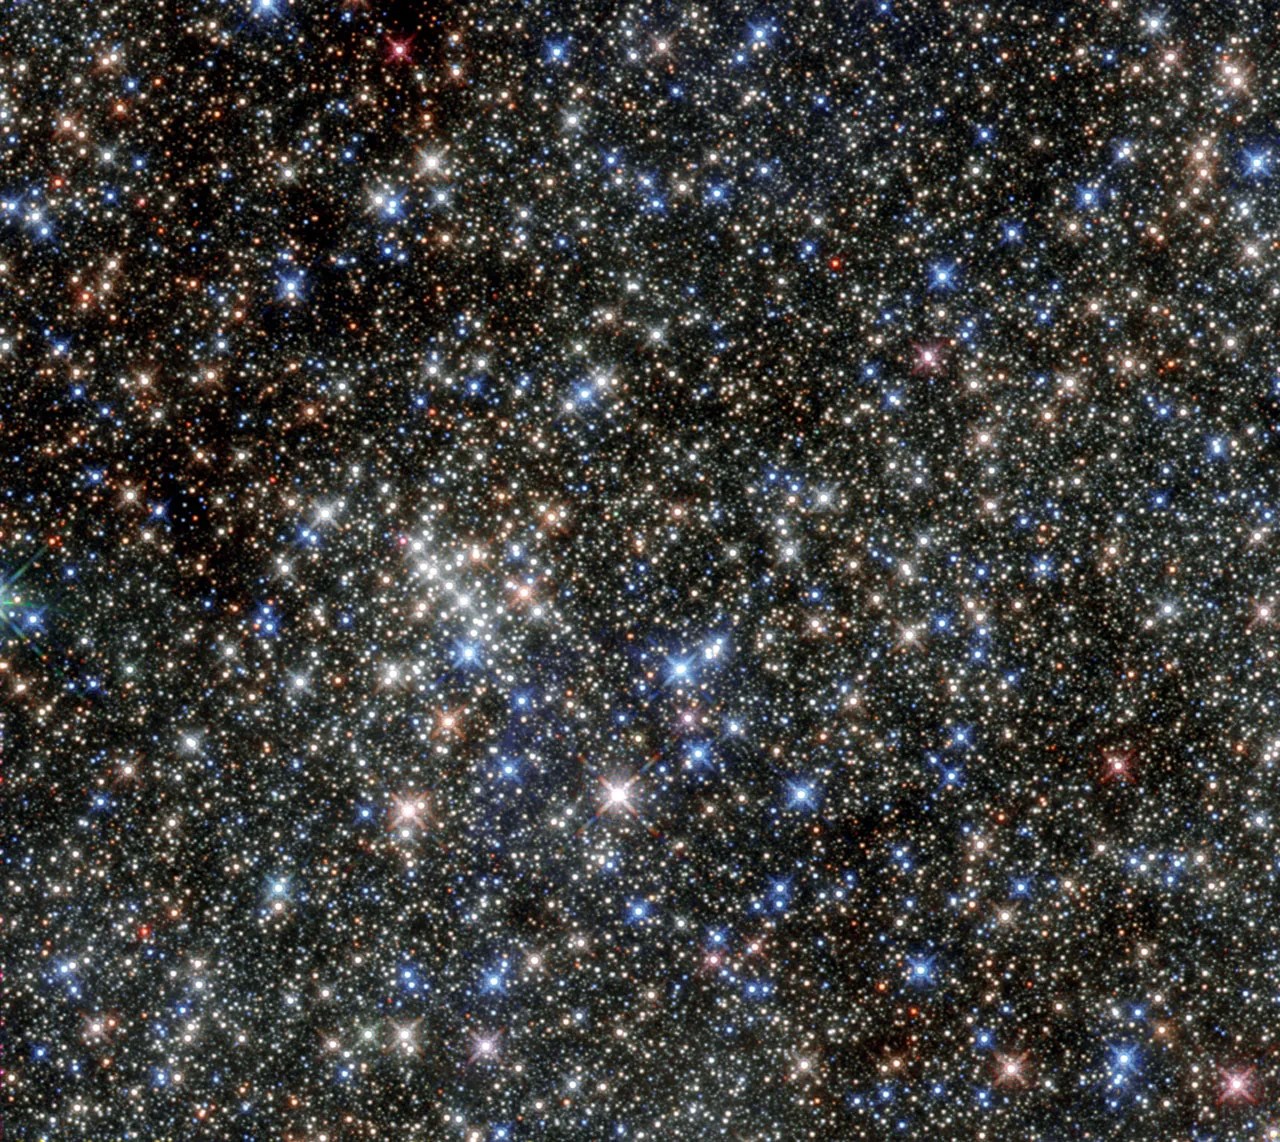 A cluster of what appears to be hundreds of stars on a black background